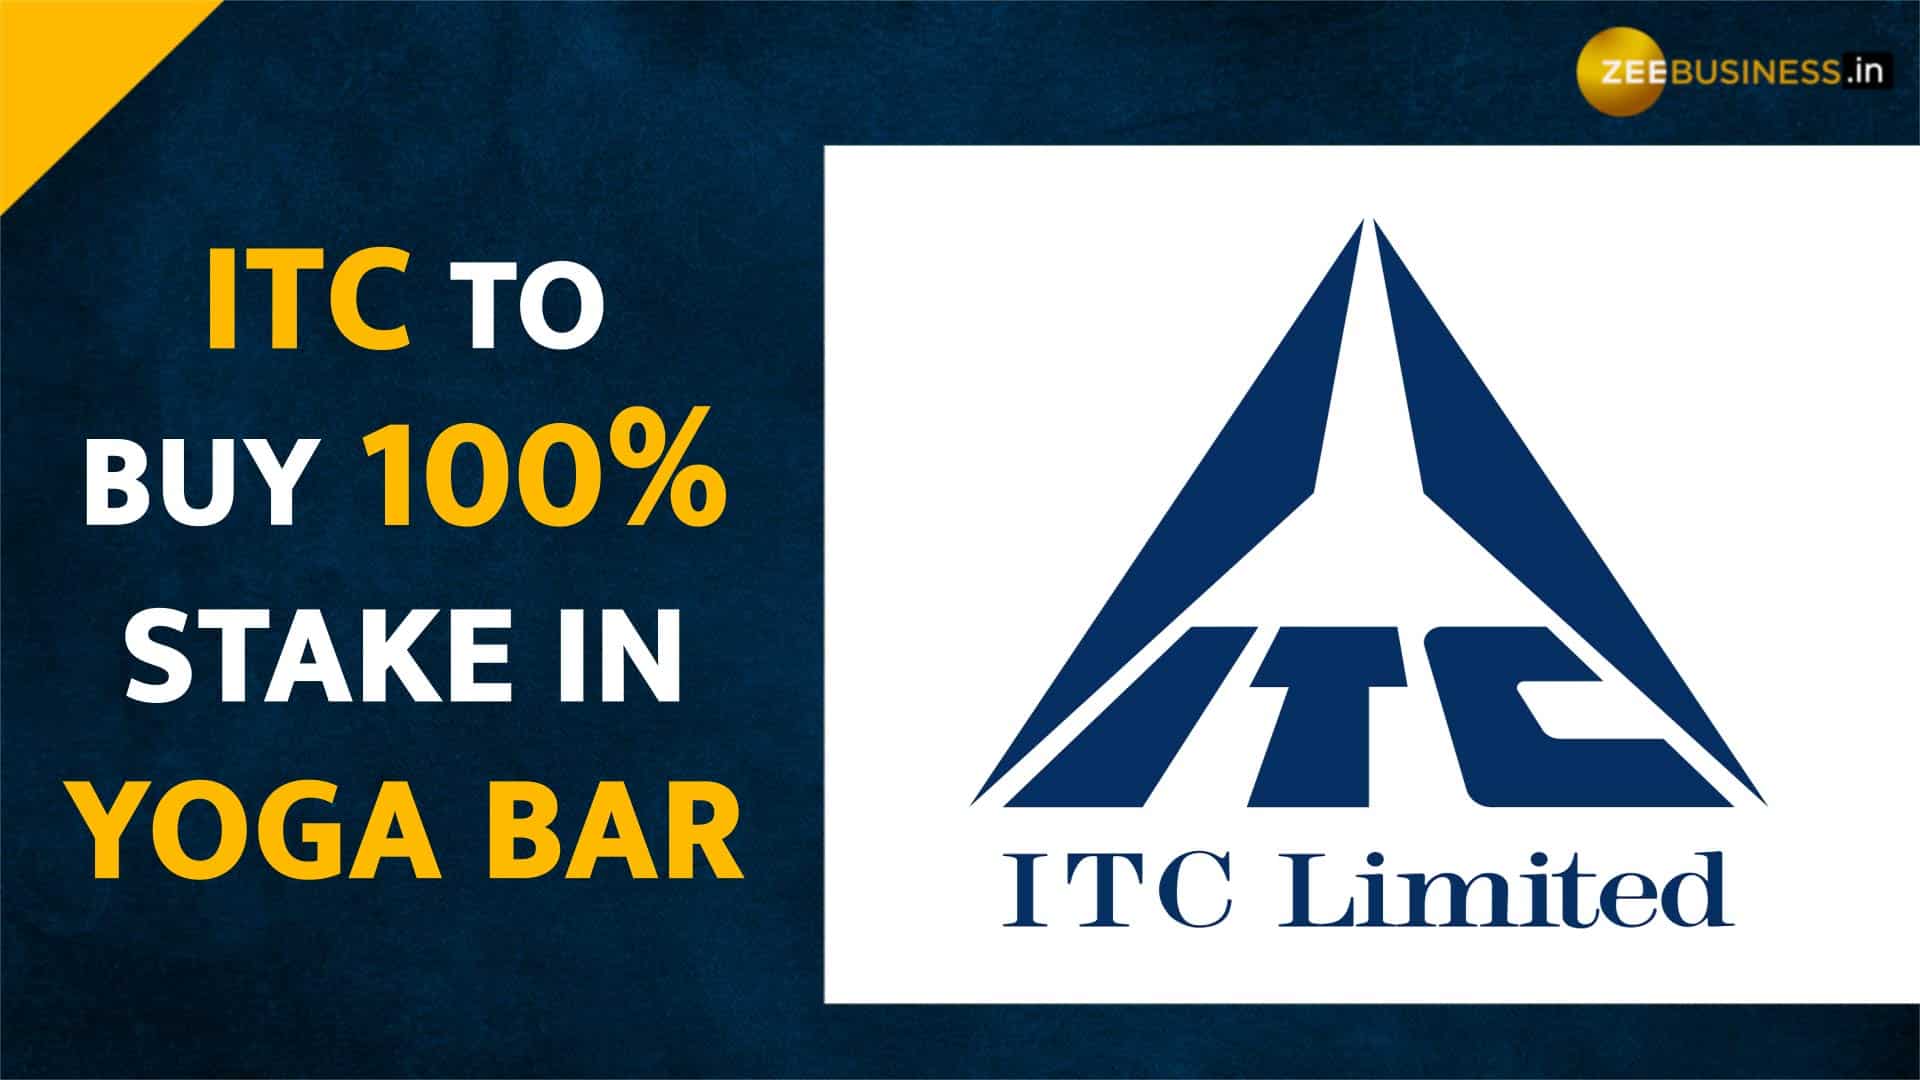 ITC to acquire 100% stake in Yoga Bar in the next 3-4 years